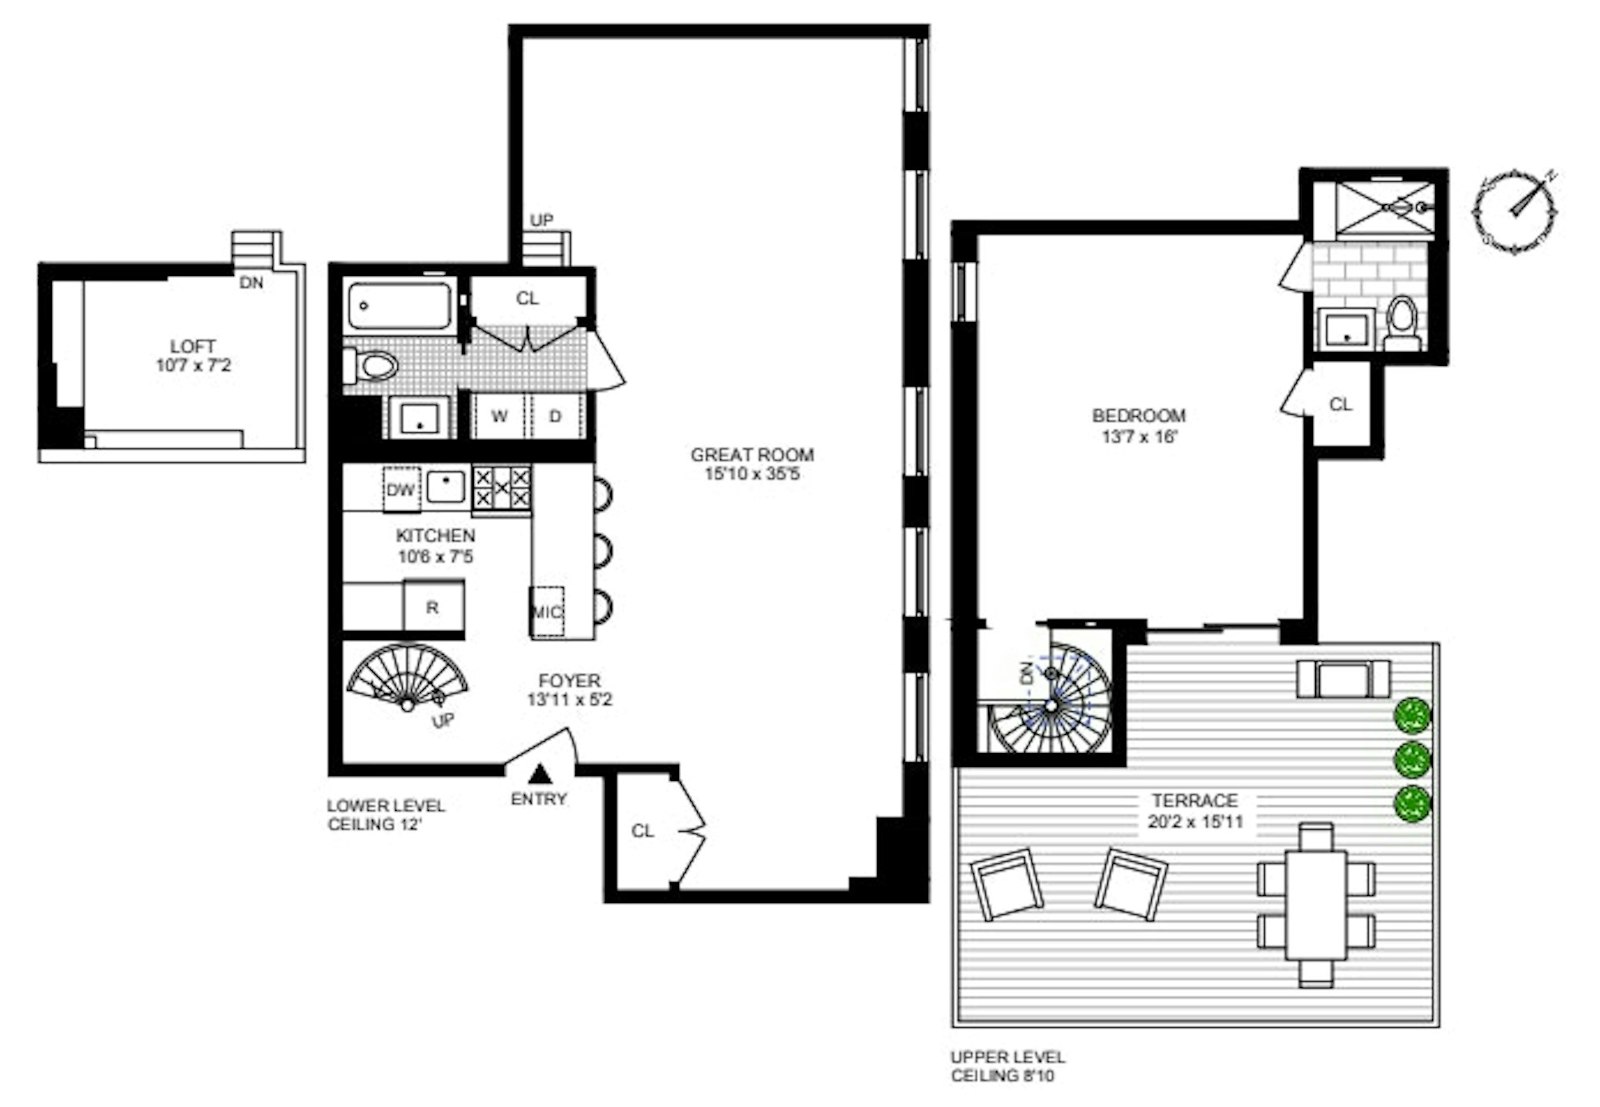 Floorplan for 120 Boerum Place, 3A